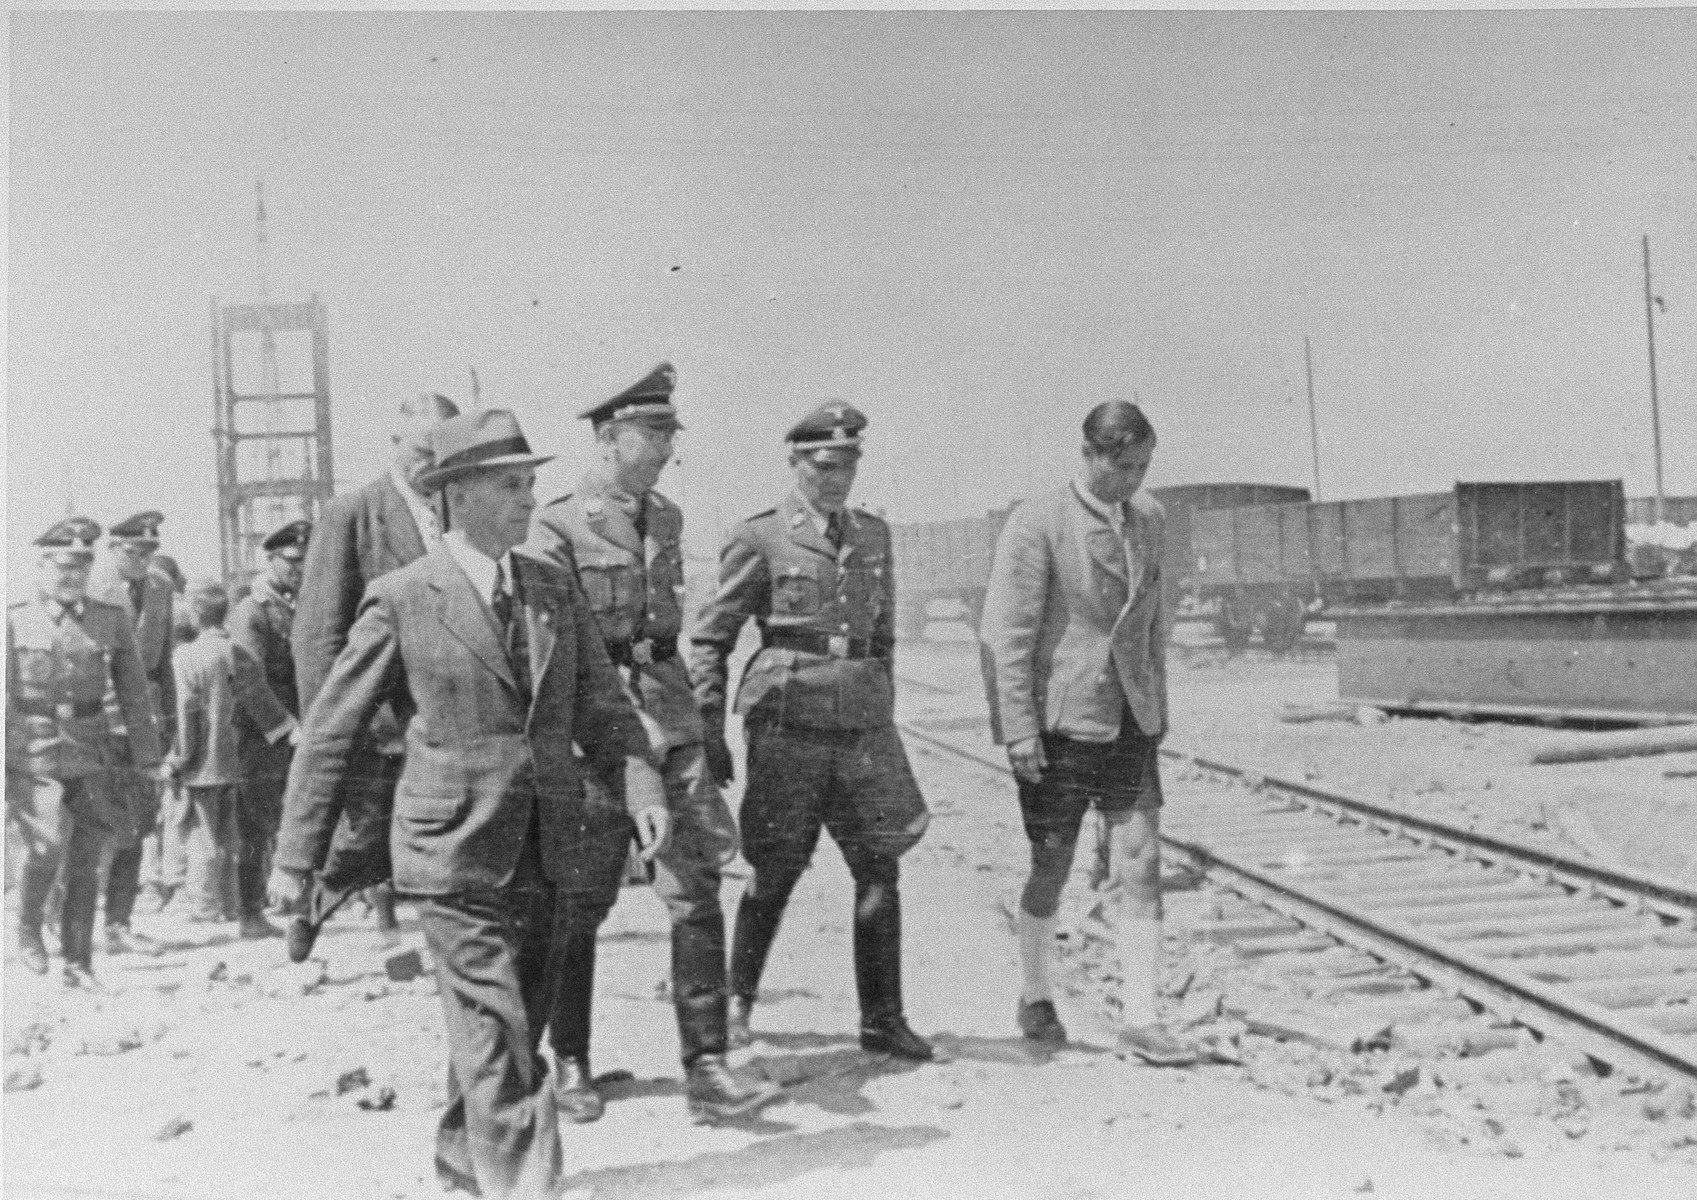 Reichsfuehrer SS Heinrich Himmler tours the Monowitz-Buna building site in the company of Max Faust (wearing the fedora) and Auschwitz commandant Rudolf Hoess (second from the right in the first row). 

Faust, who was an IG Farben engineer, was the head of building operations at Monowitz-Buna.